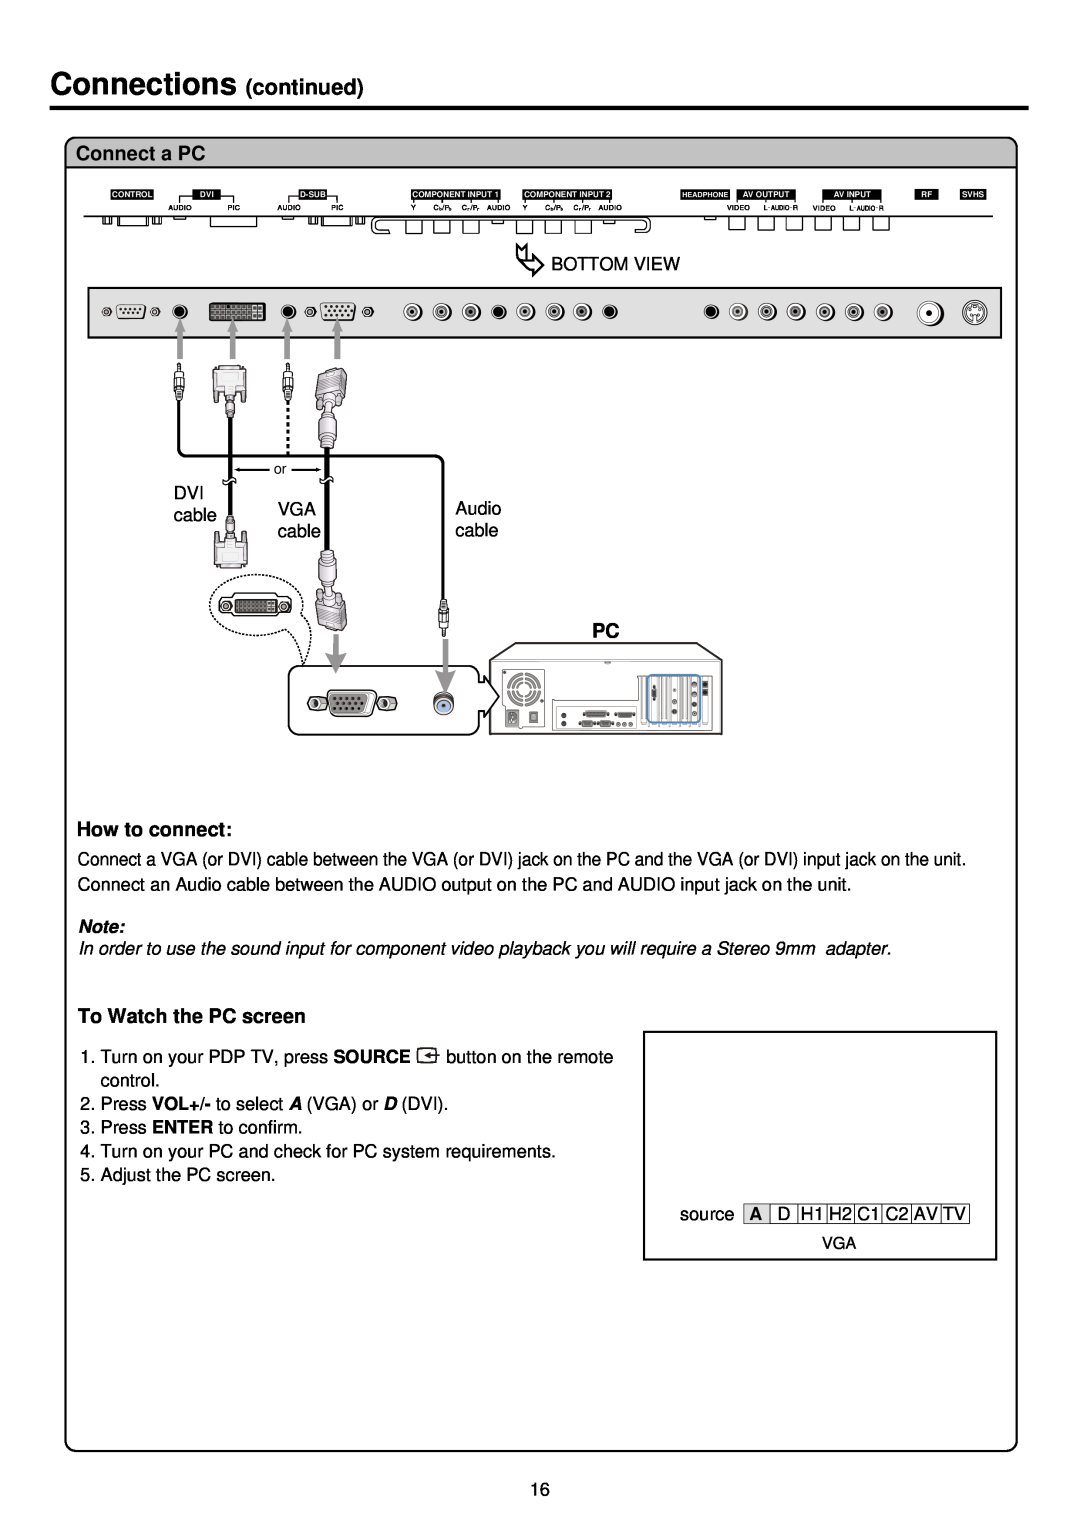 Palsonic PDP4200 owner manual Connect a PC, PC How to connect, To Watch the PC screen, Connections continued 